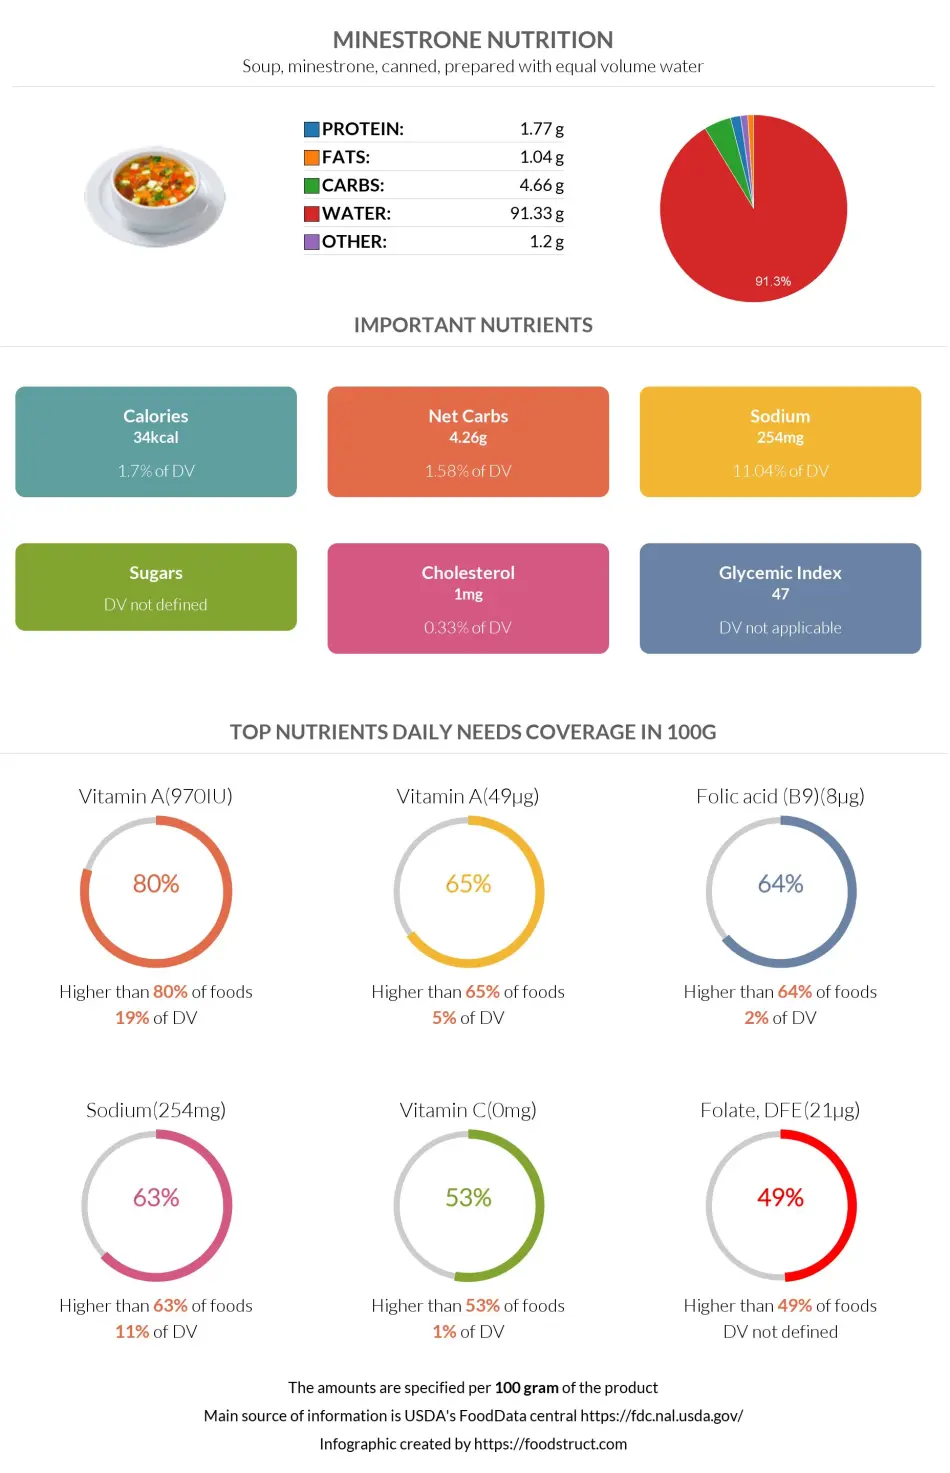 Minestrone nutrition infographic